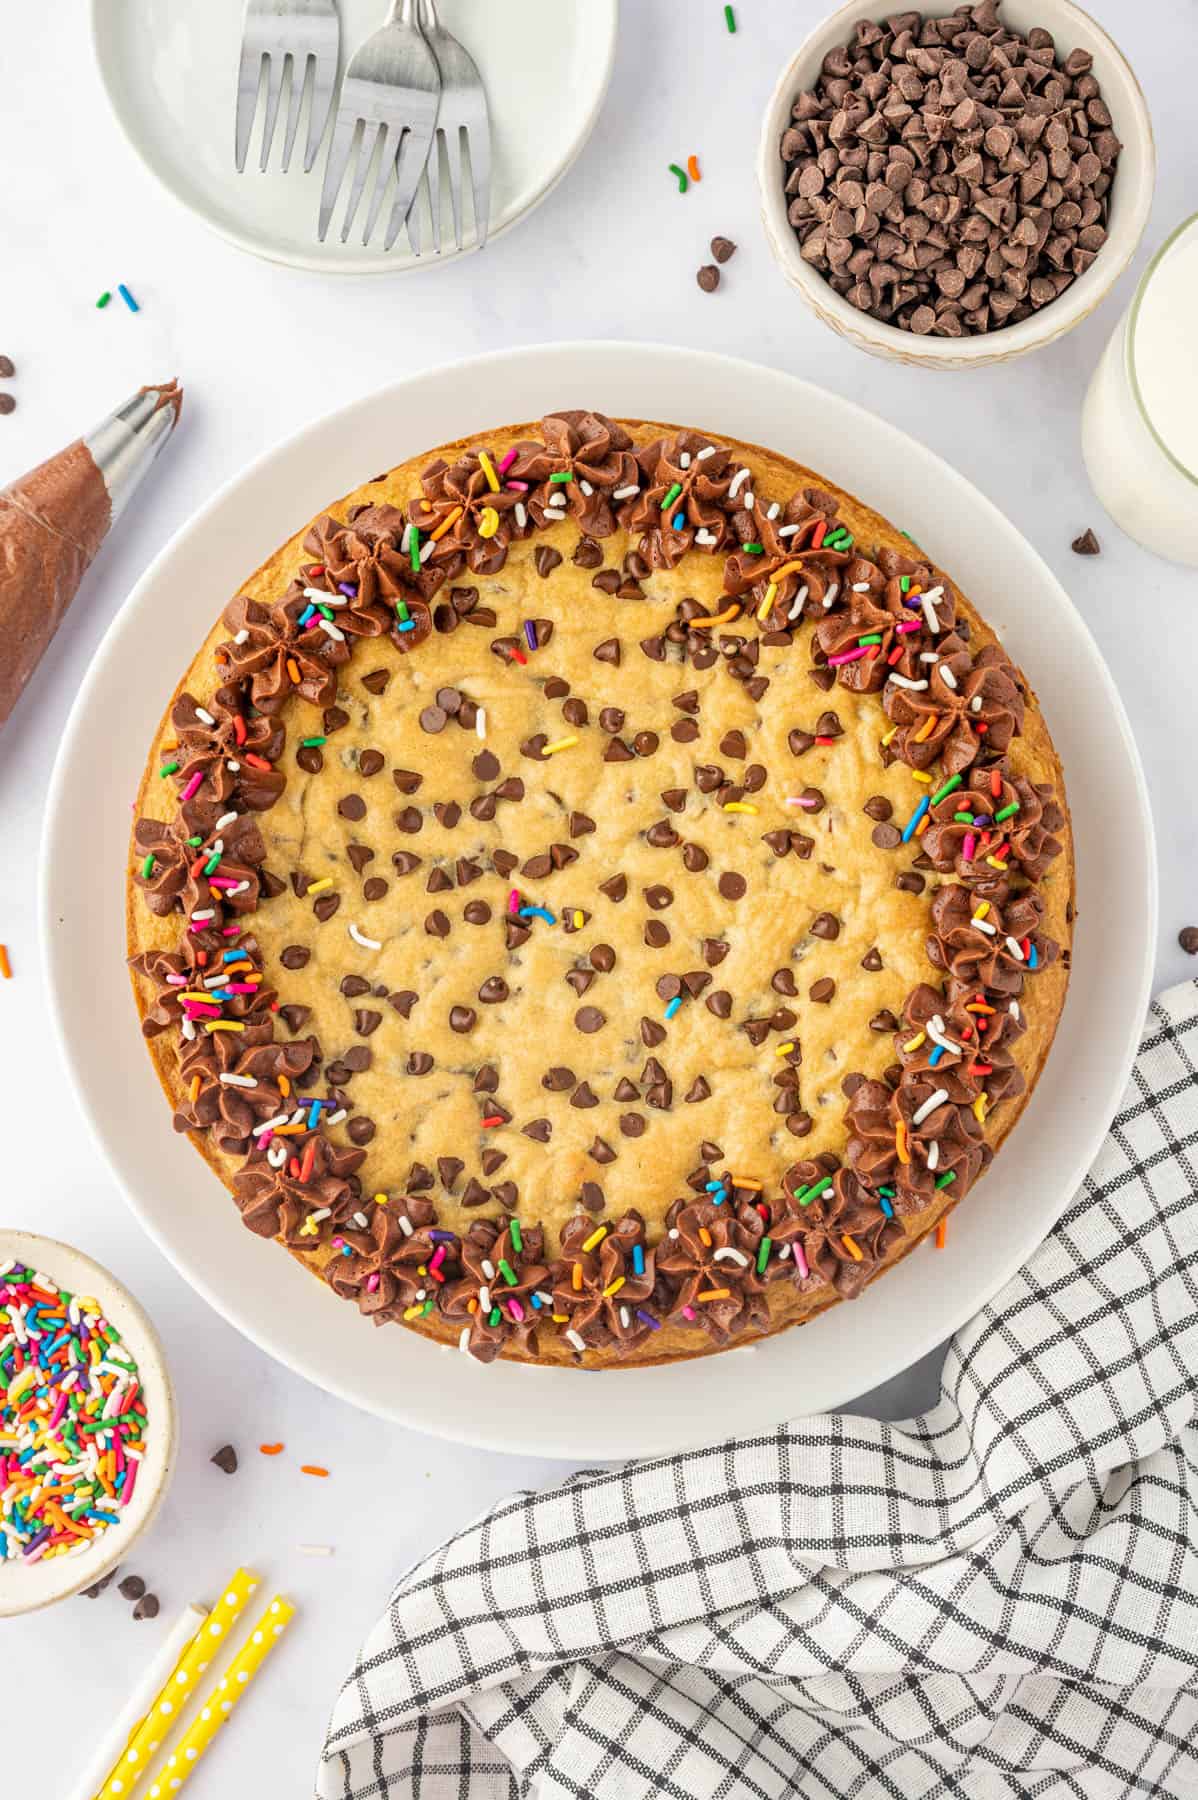 Chocolate Chip Cookie Cake Recipe (With Chocolate Frosting)